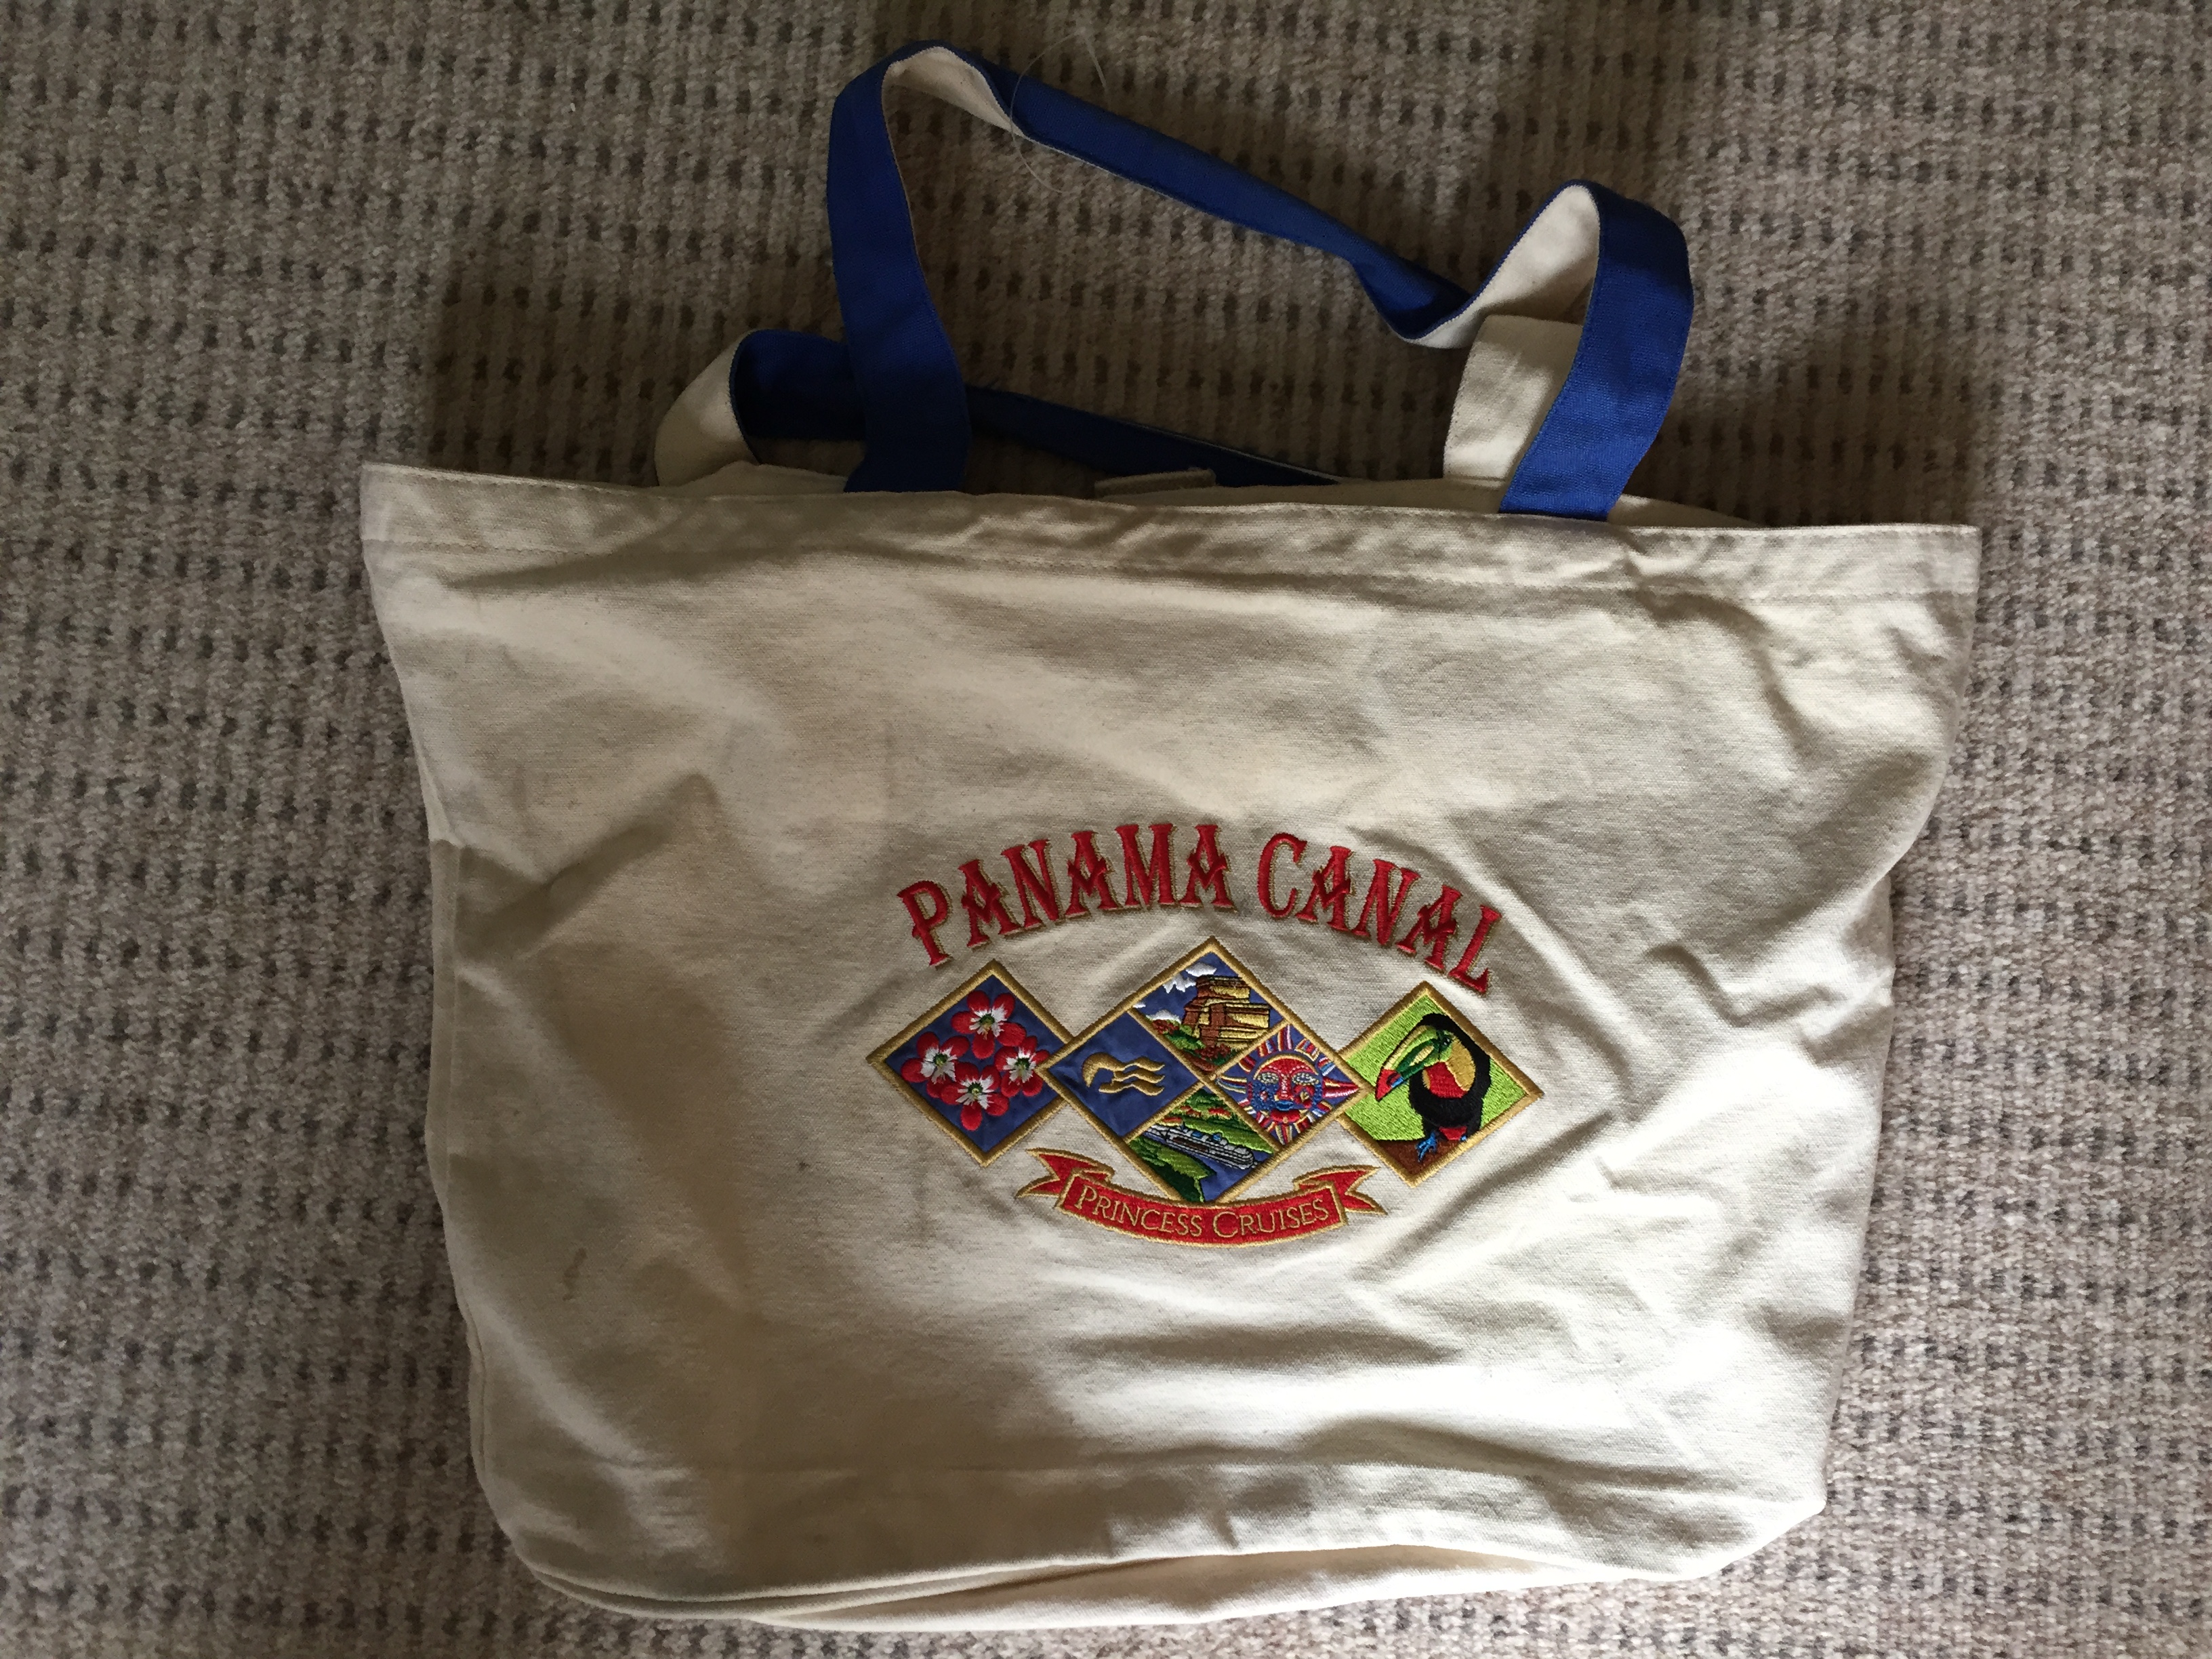 AS PURCHASED ON BOARD PANAMA CANAL SHOULDER BAG FROM THE PRINCESS CRUISES COMPANY